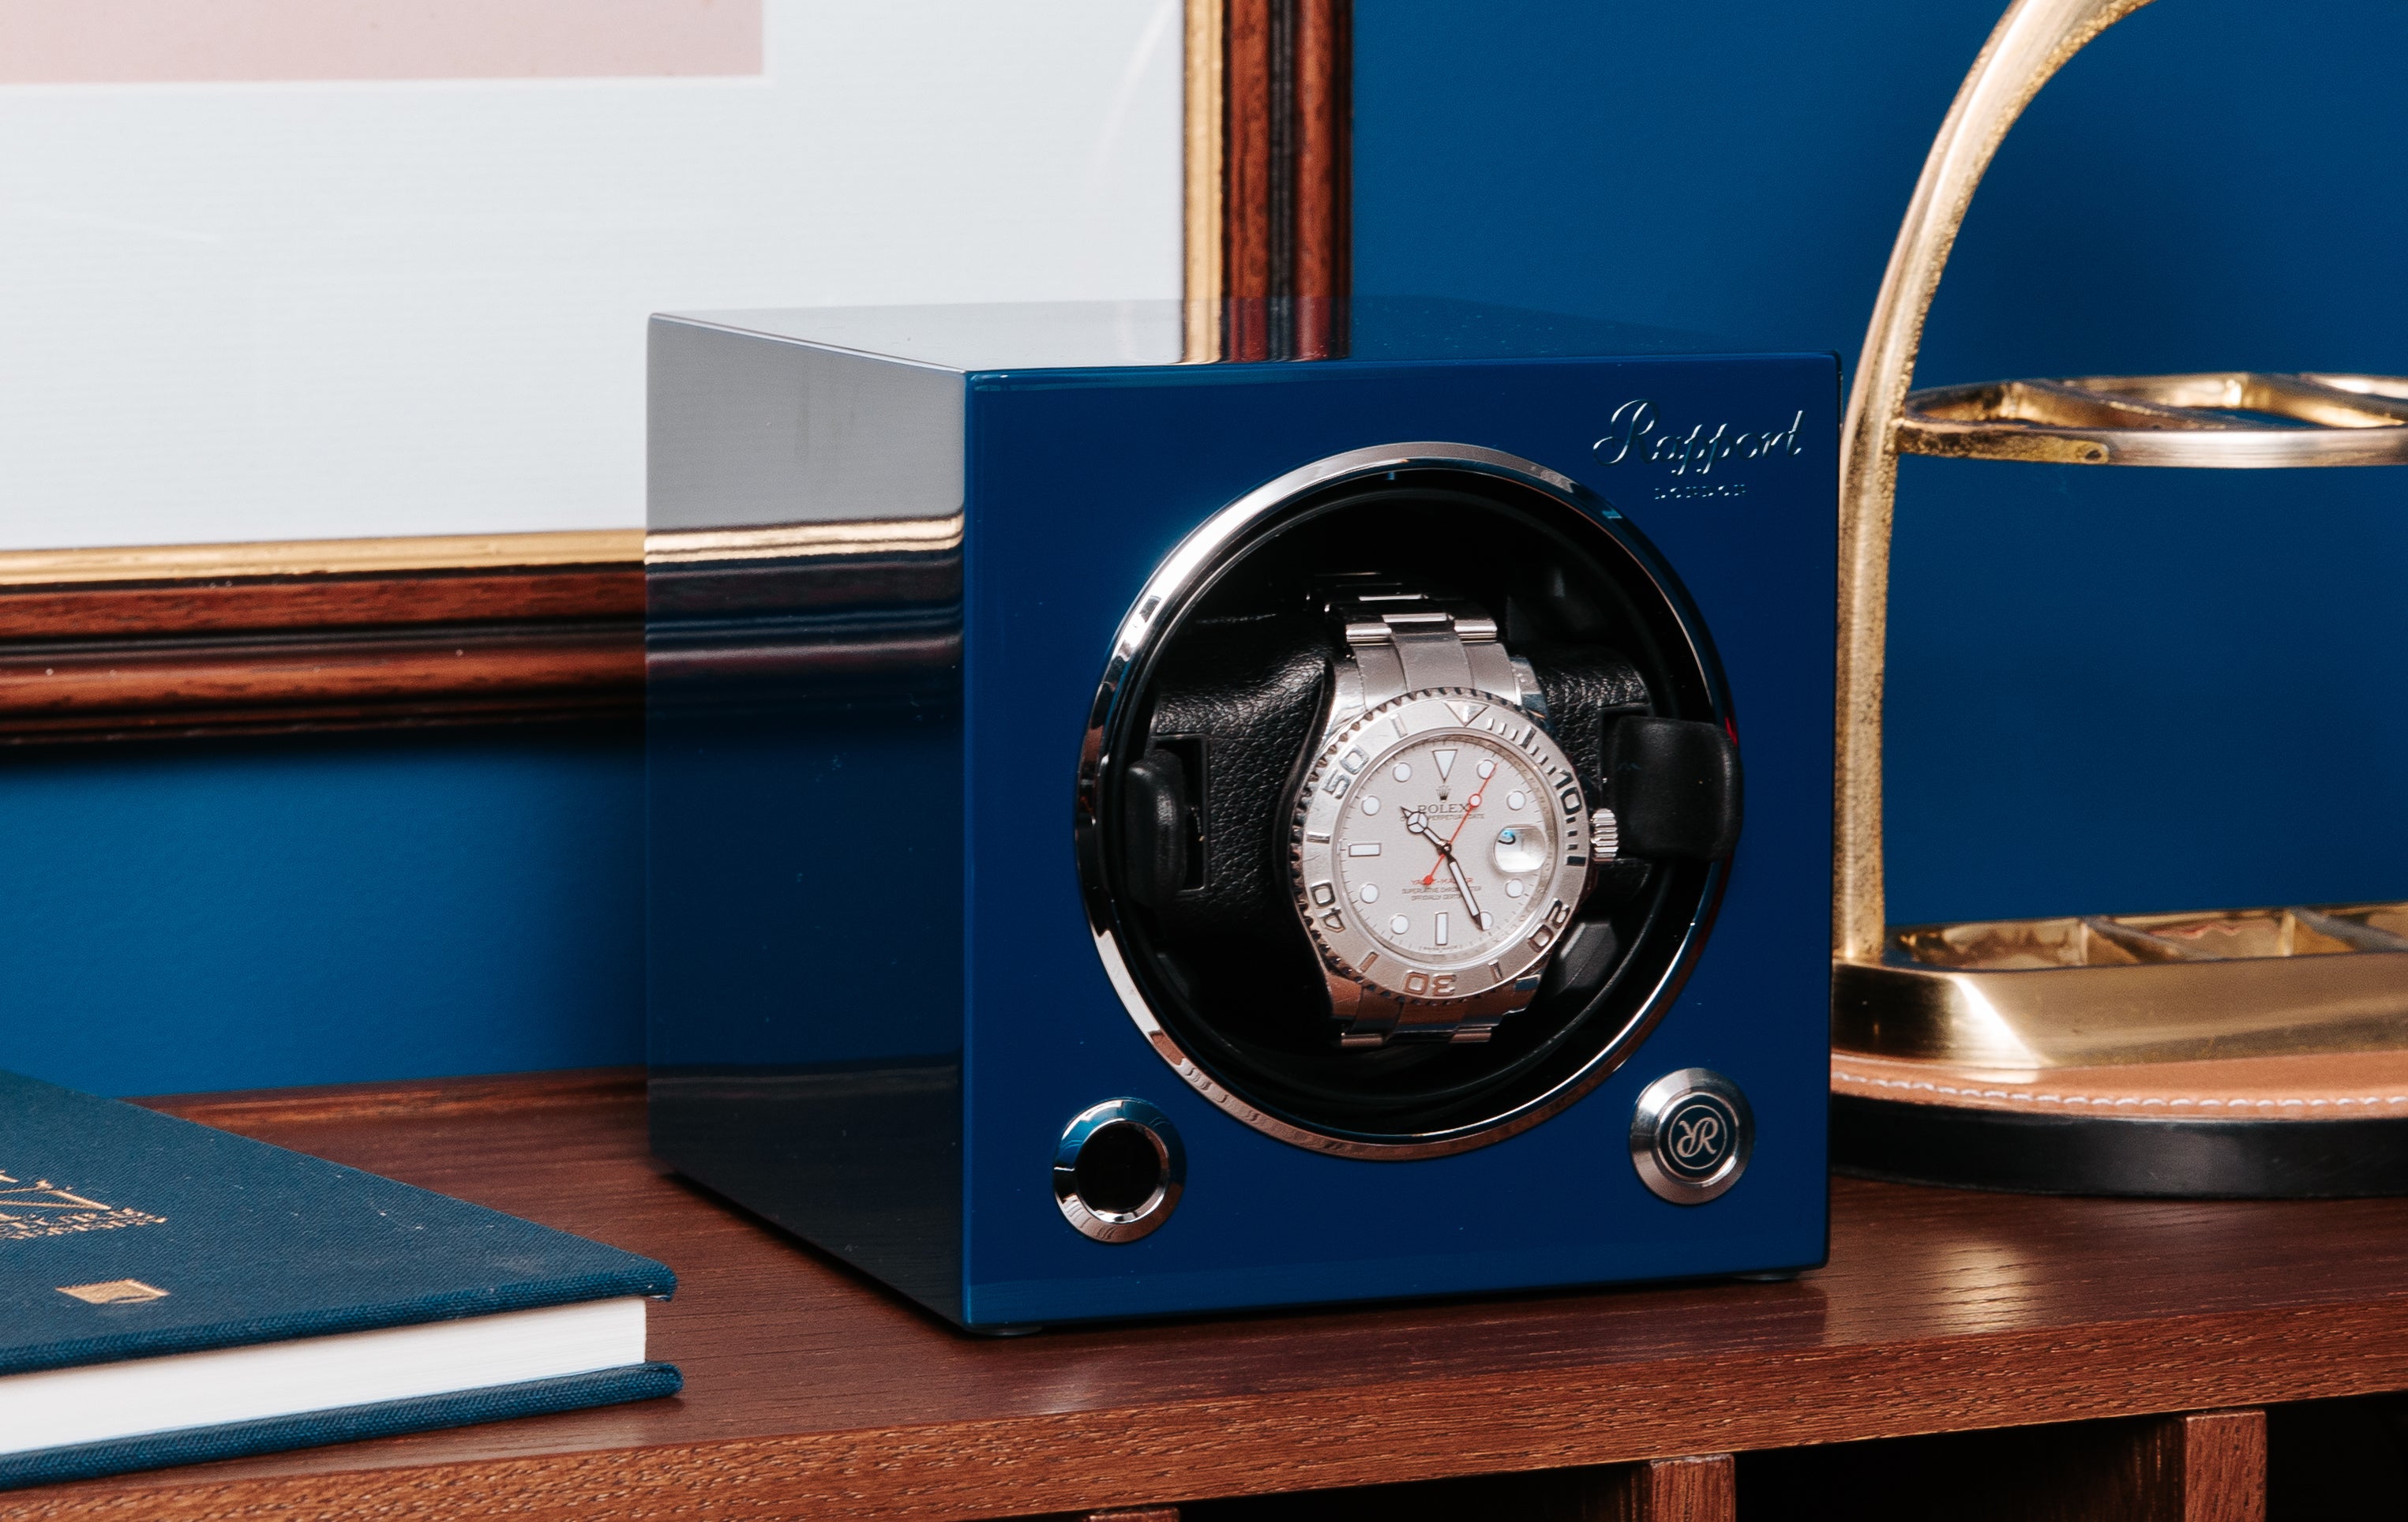 Tips for Gifting a Rapport Watch Winder